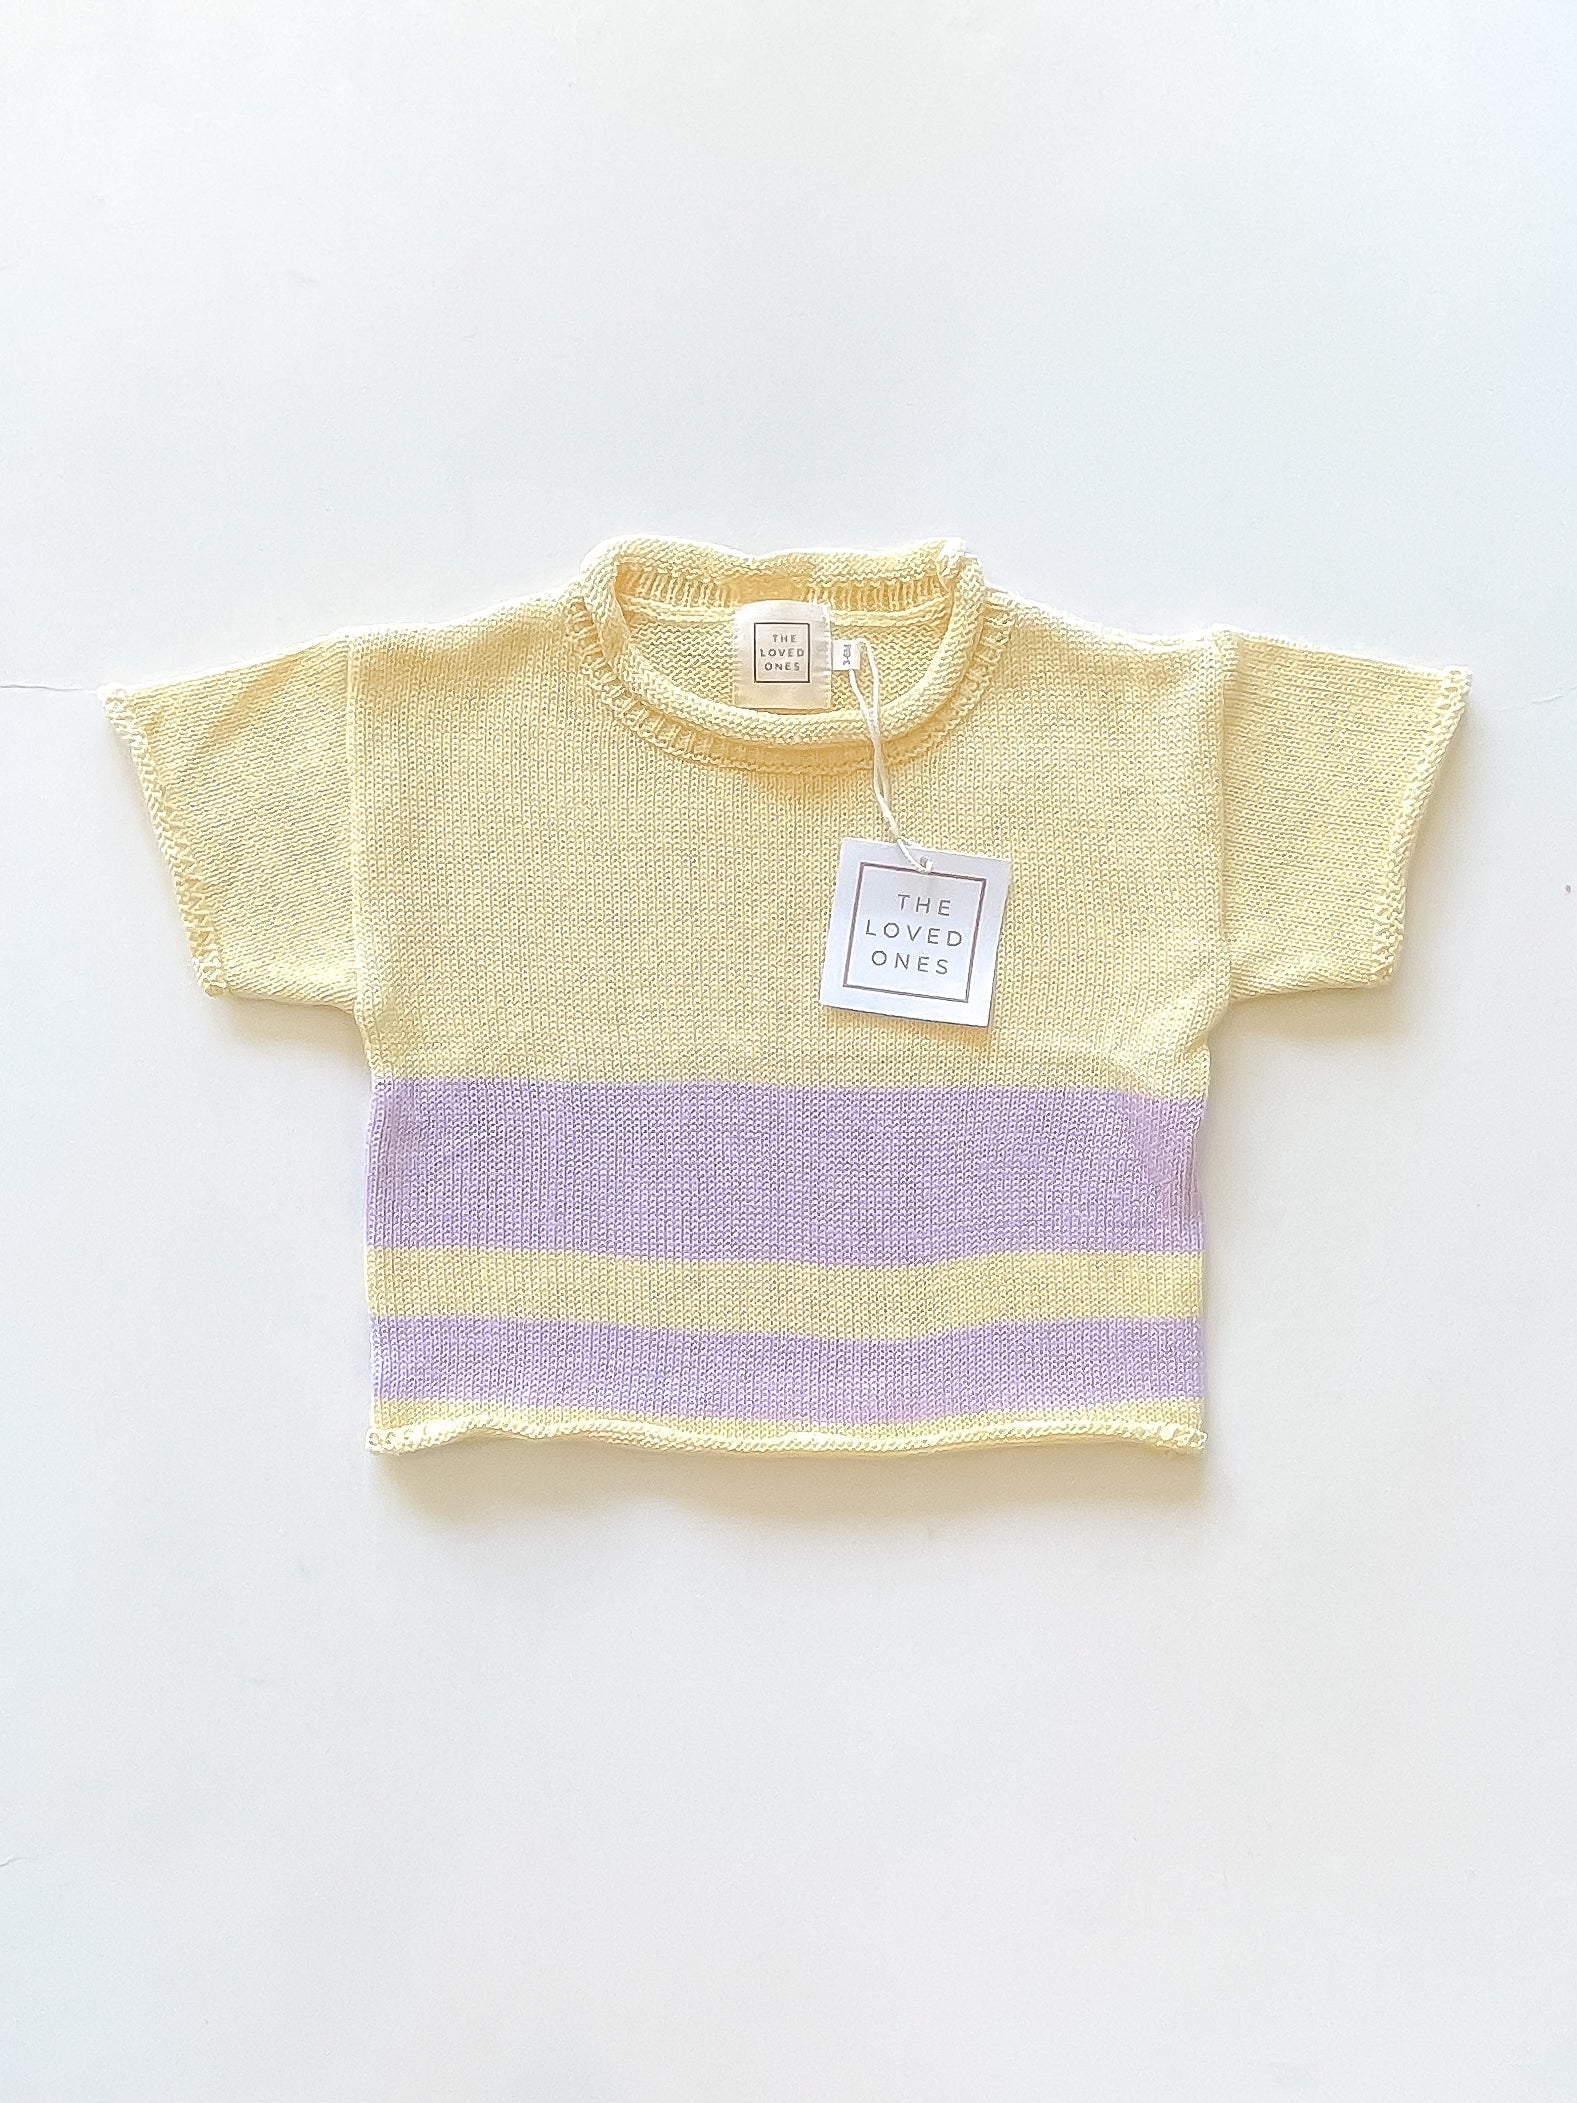 BNWT The Loved Ones knit tee (0-3m)